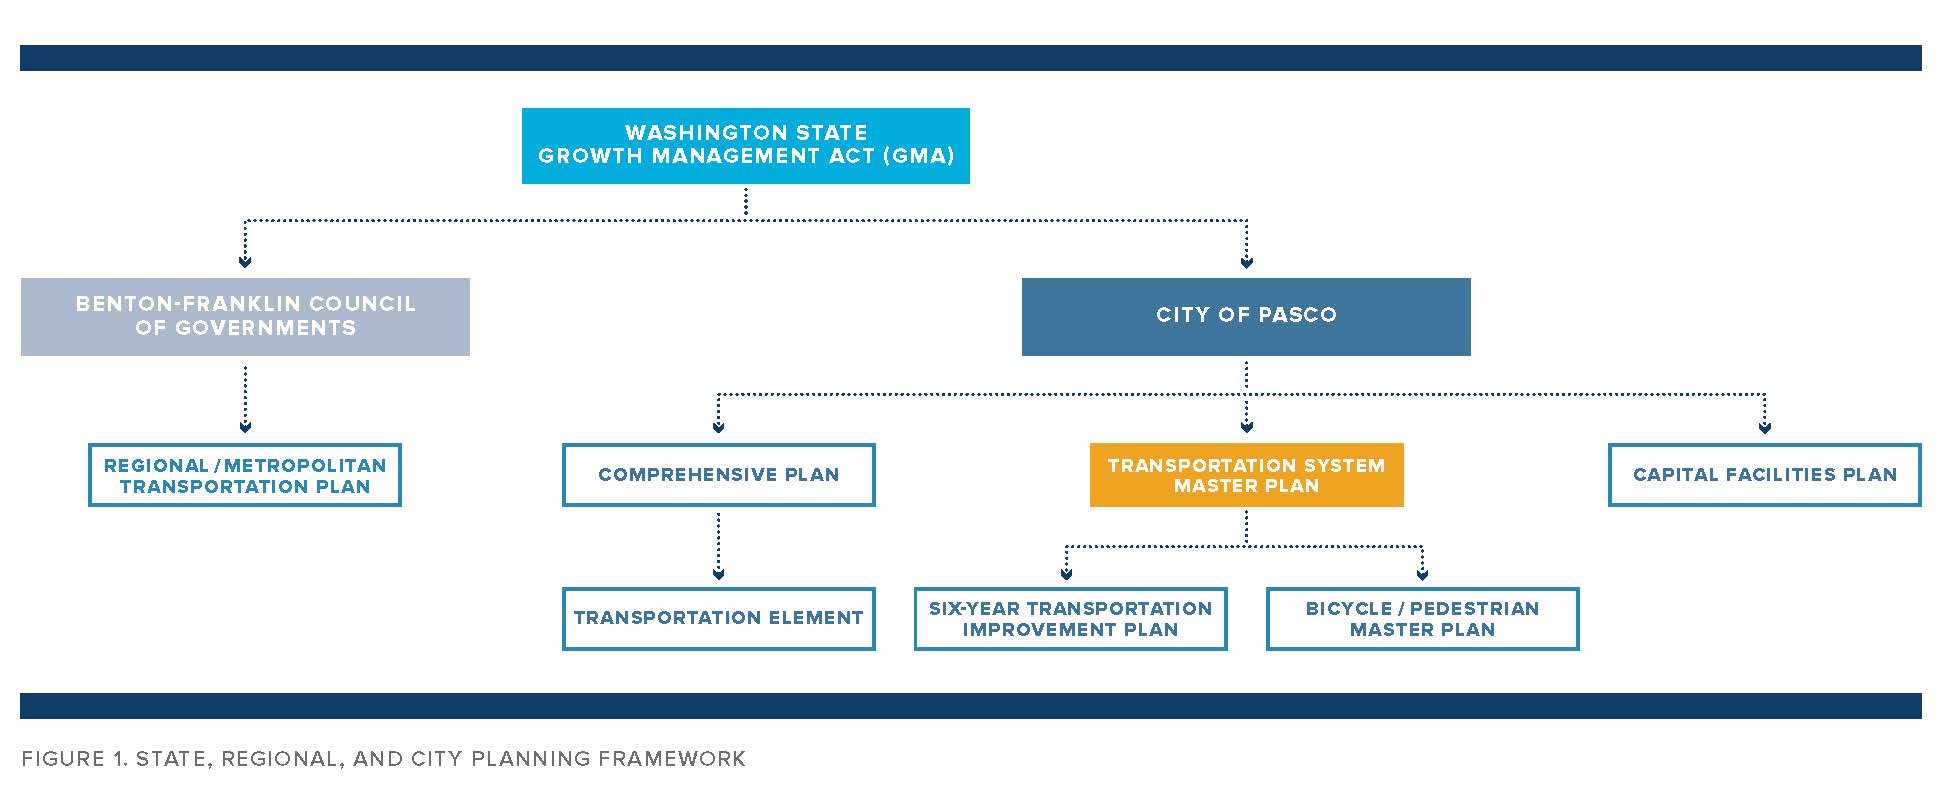 FIGURE 1. STATE, REGIONAL, AND CITY PLANNING FRAMEWORK